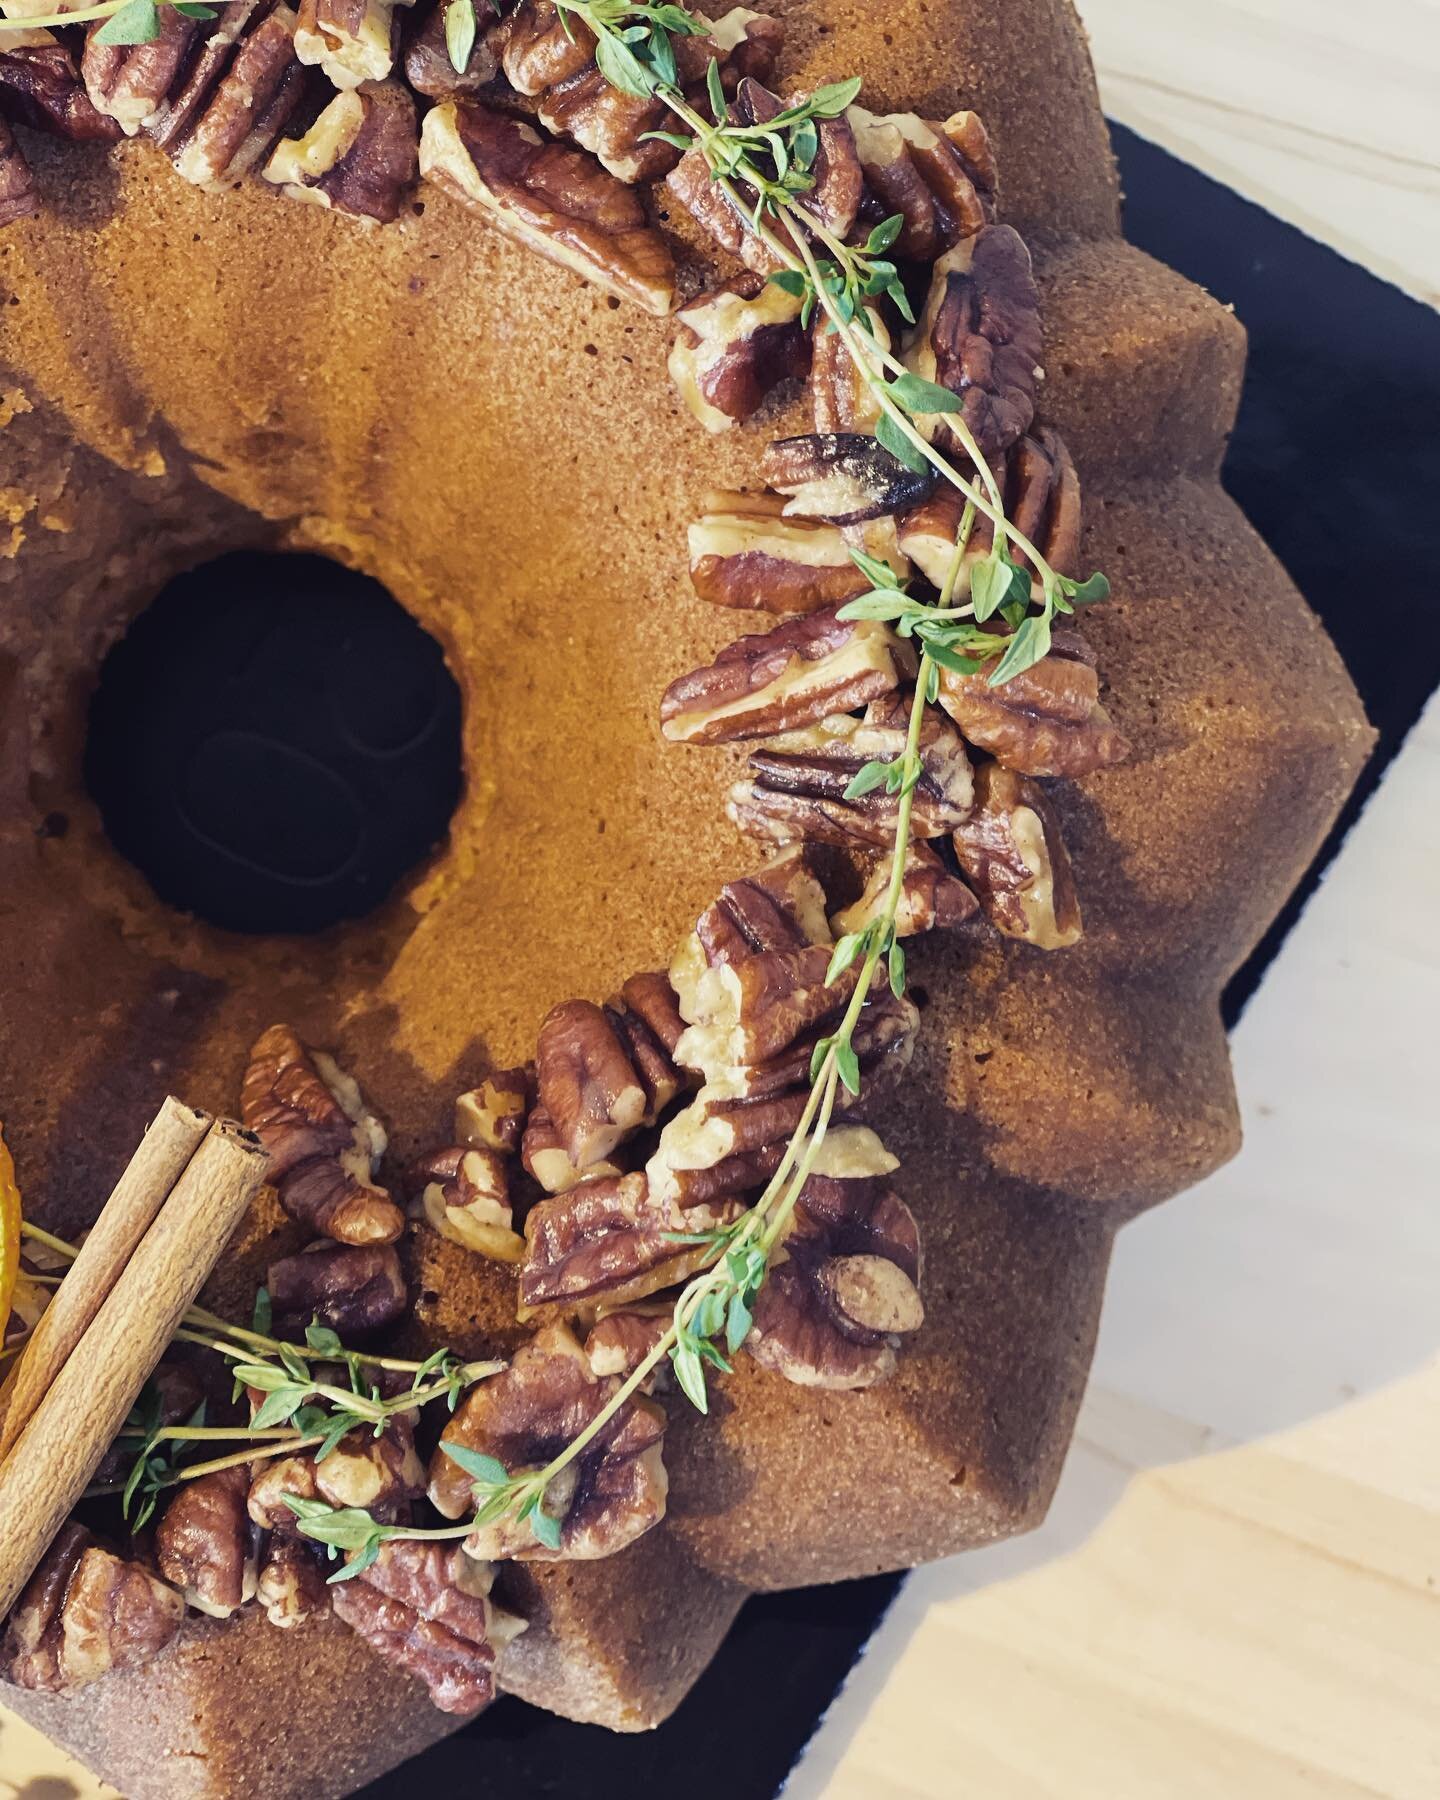 Mom-Chef Lily has surprised us with her new Vegan Rum Pecan Cake specially for the holiday season&hellip; it&rsquo;s vegan and so moist! Enjoy a slice with your tea or coffee, or order a whole cake for the family.
. . . 
Caf&eacute; Bloom Bali
coffee